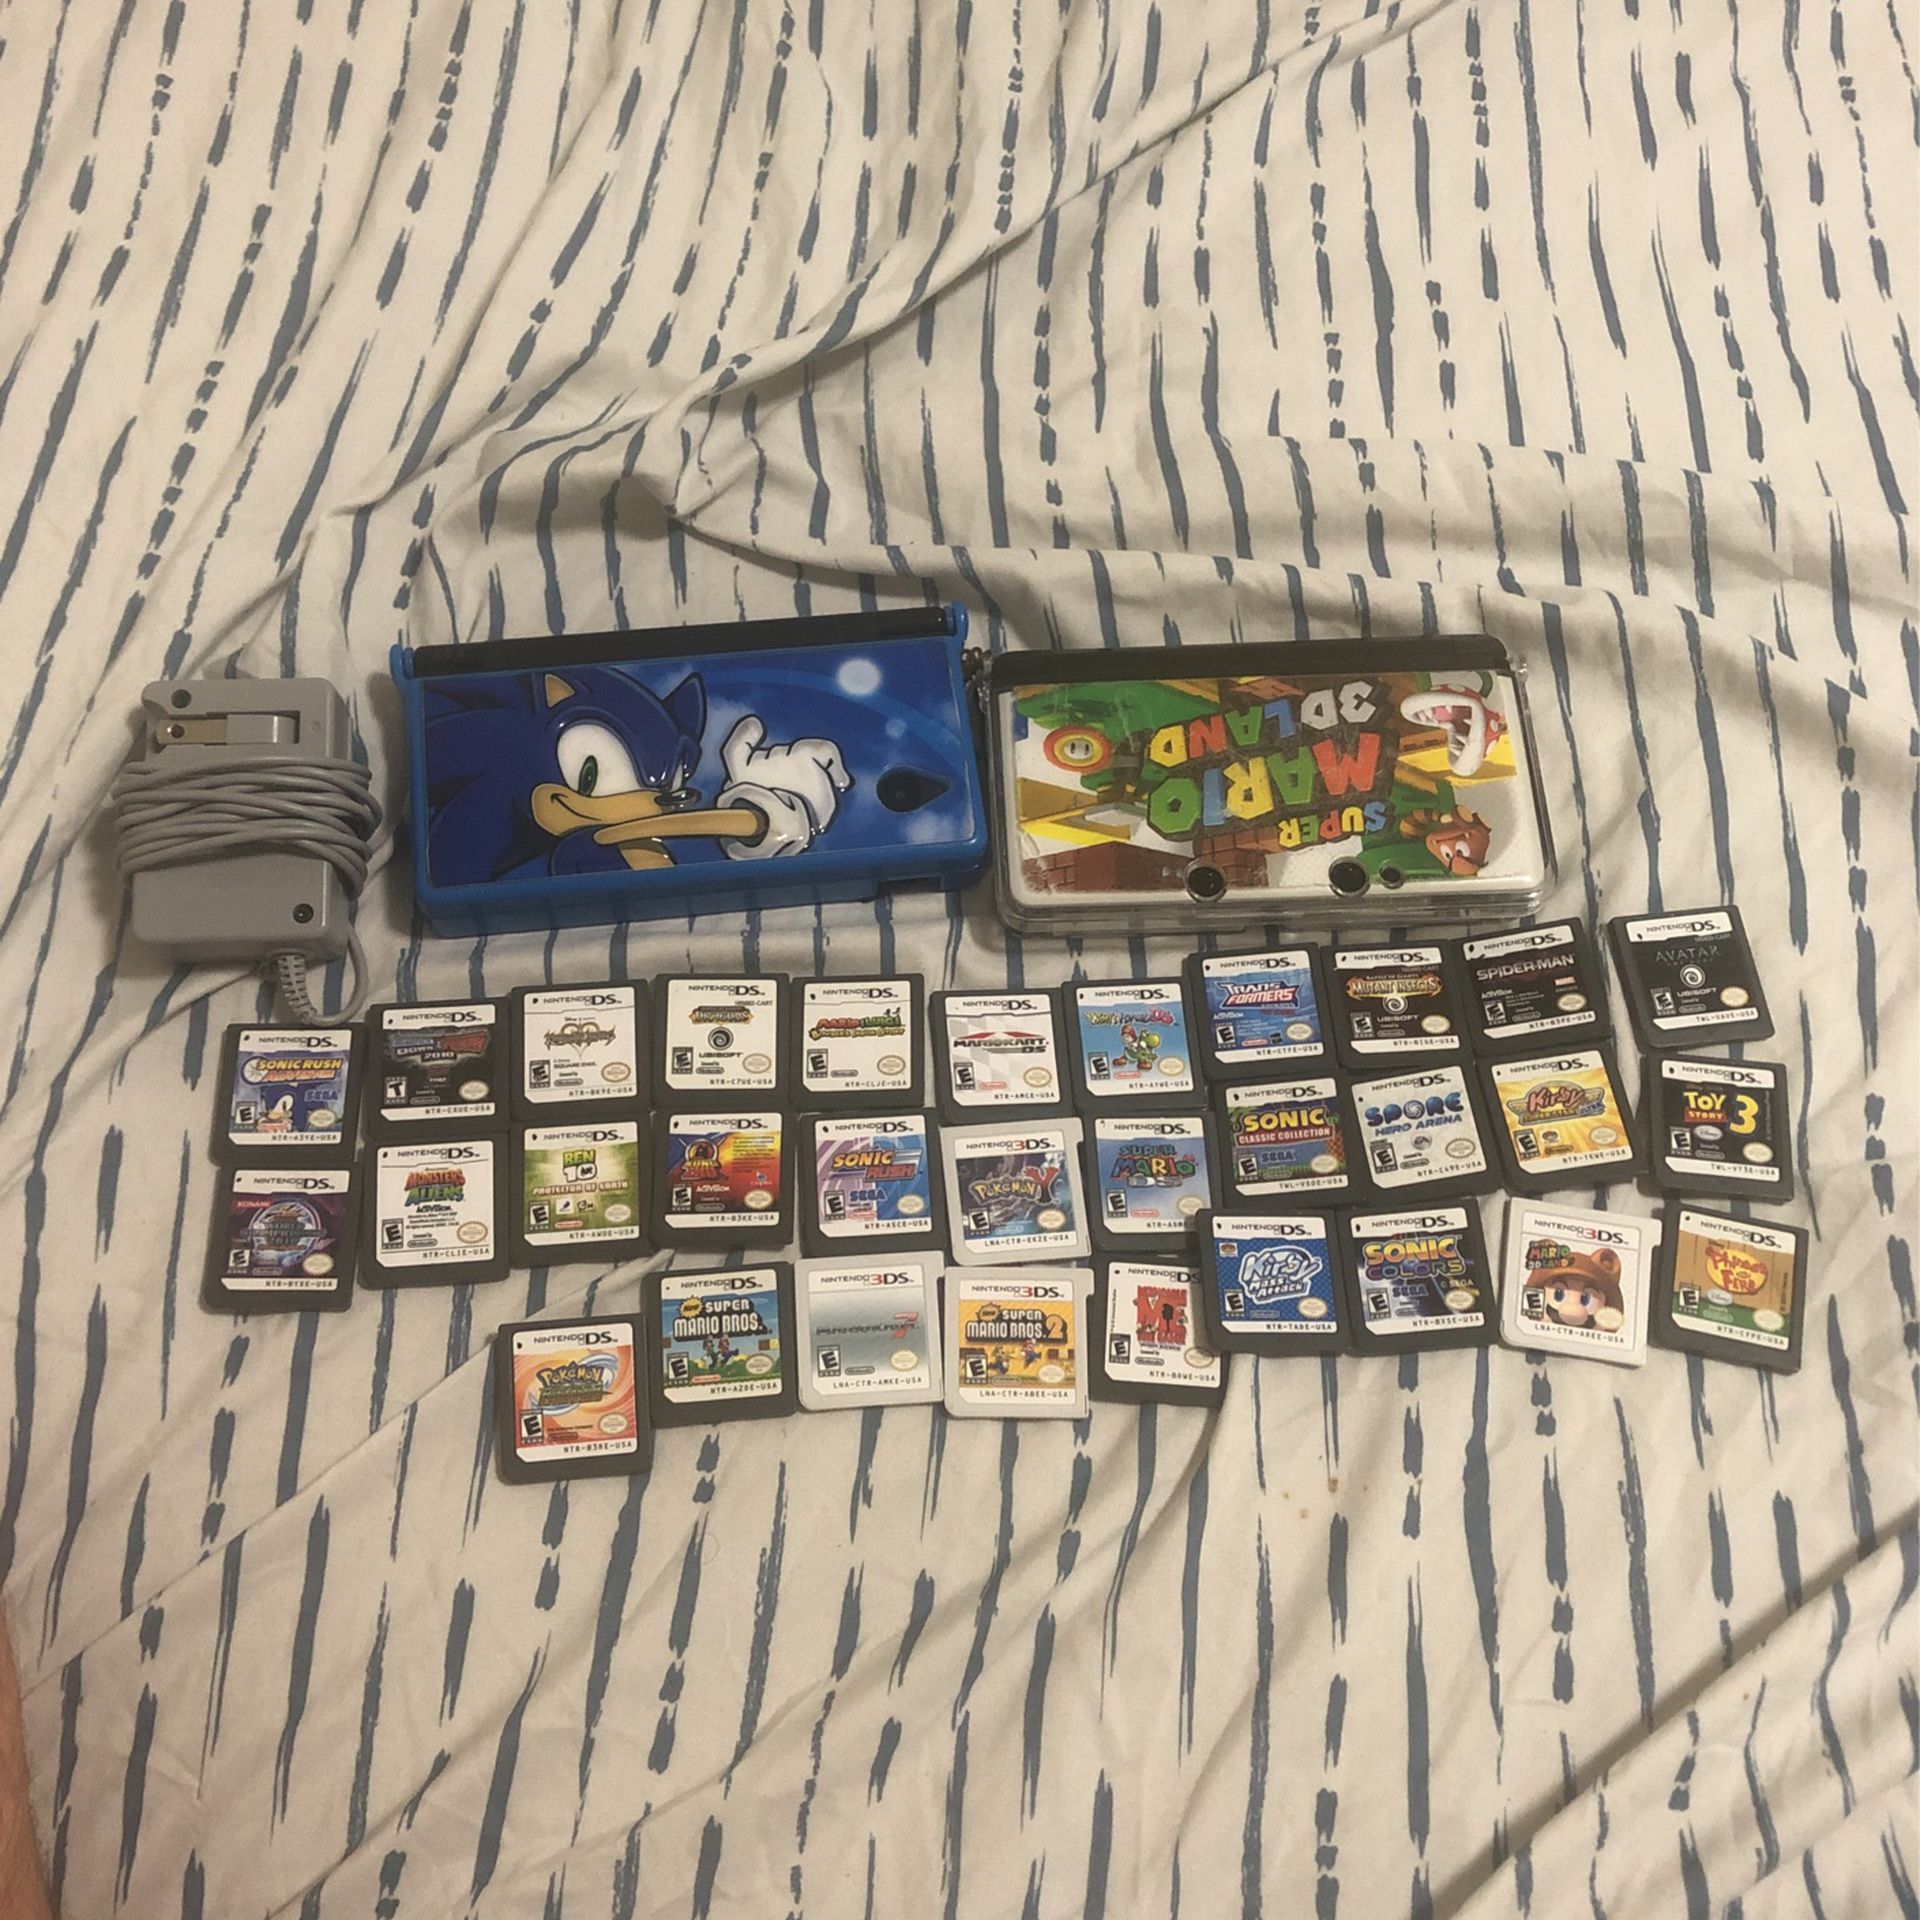 Nintendo 3ds + Nintendo DS with 30 Games And Protective Cases Included